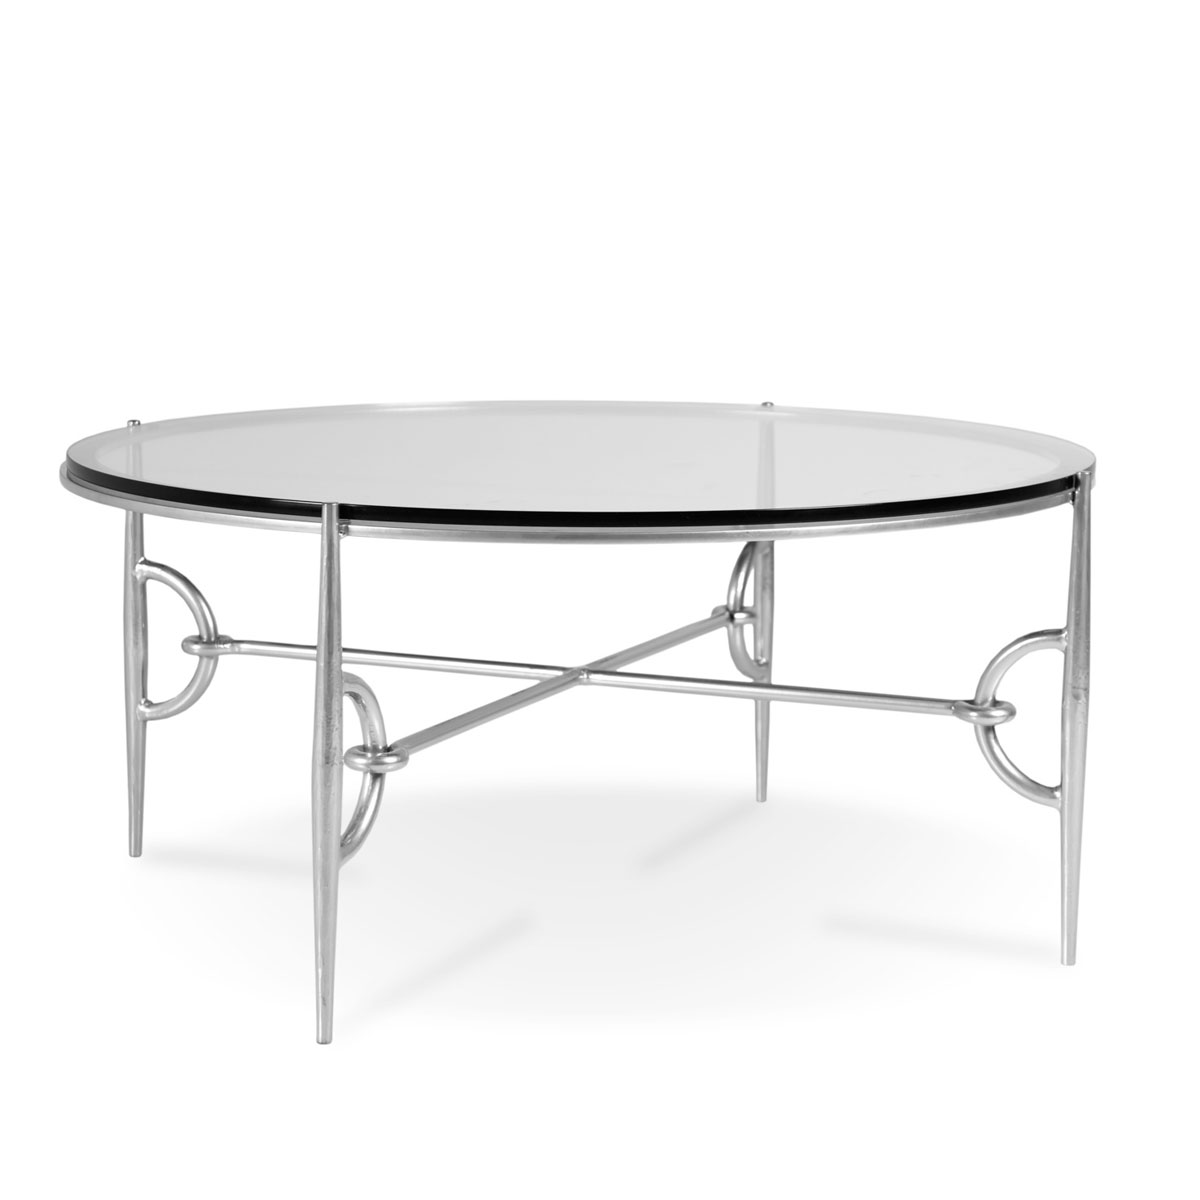 Charleston Forge Paddock 36 in Round Cocktail Table